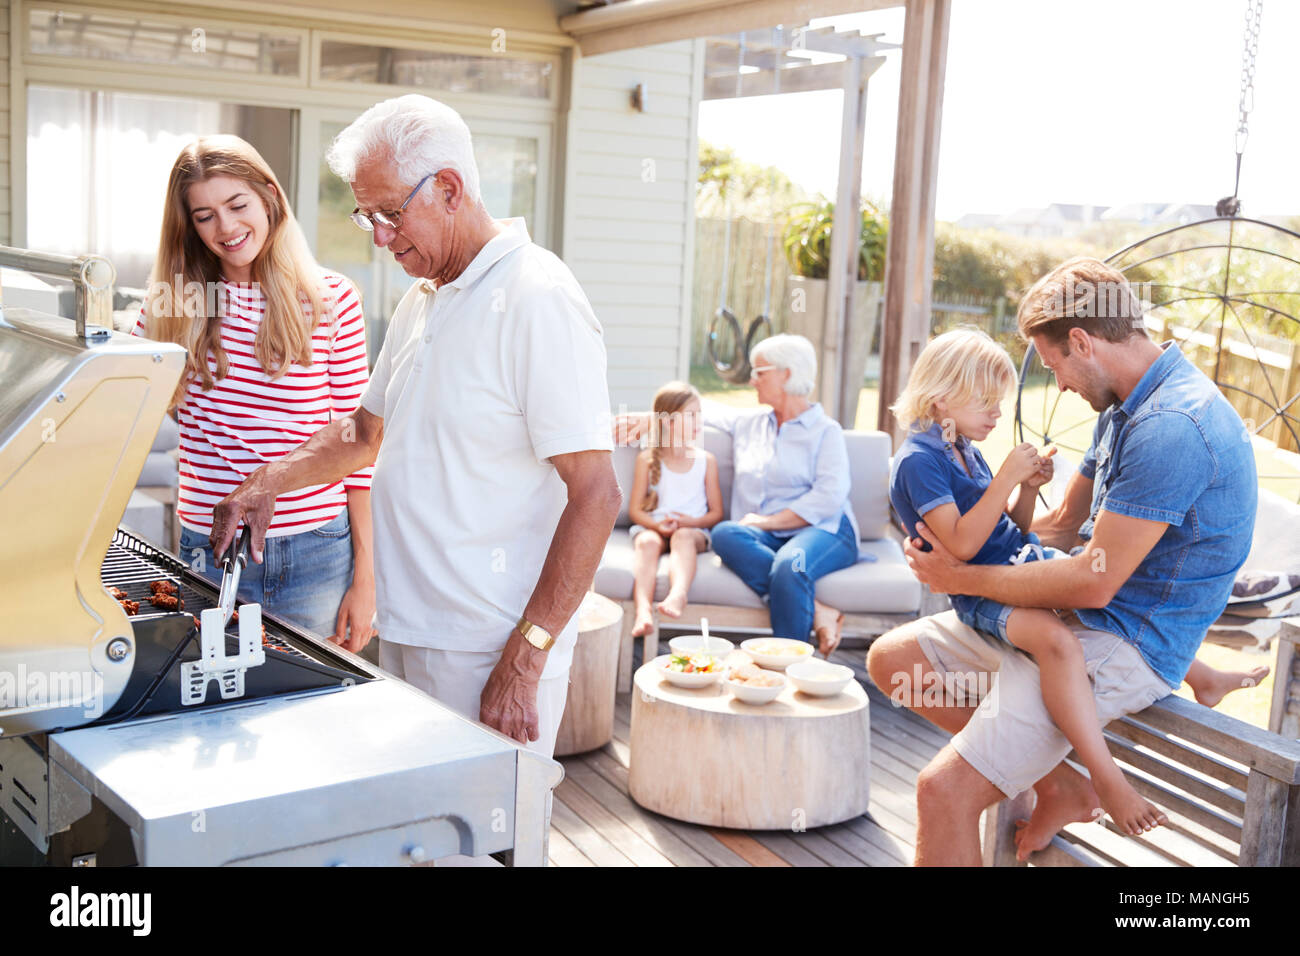 Multi Generation Family Enjoying Cooking Barbecue At Home Stock Photo